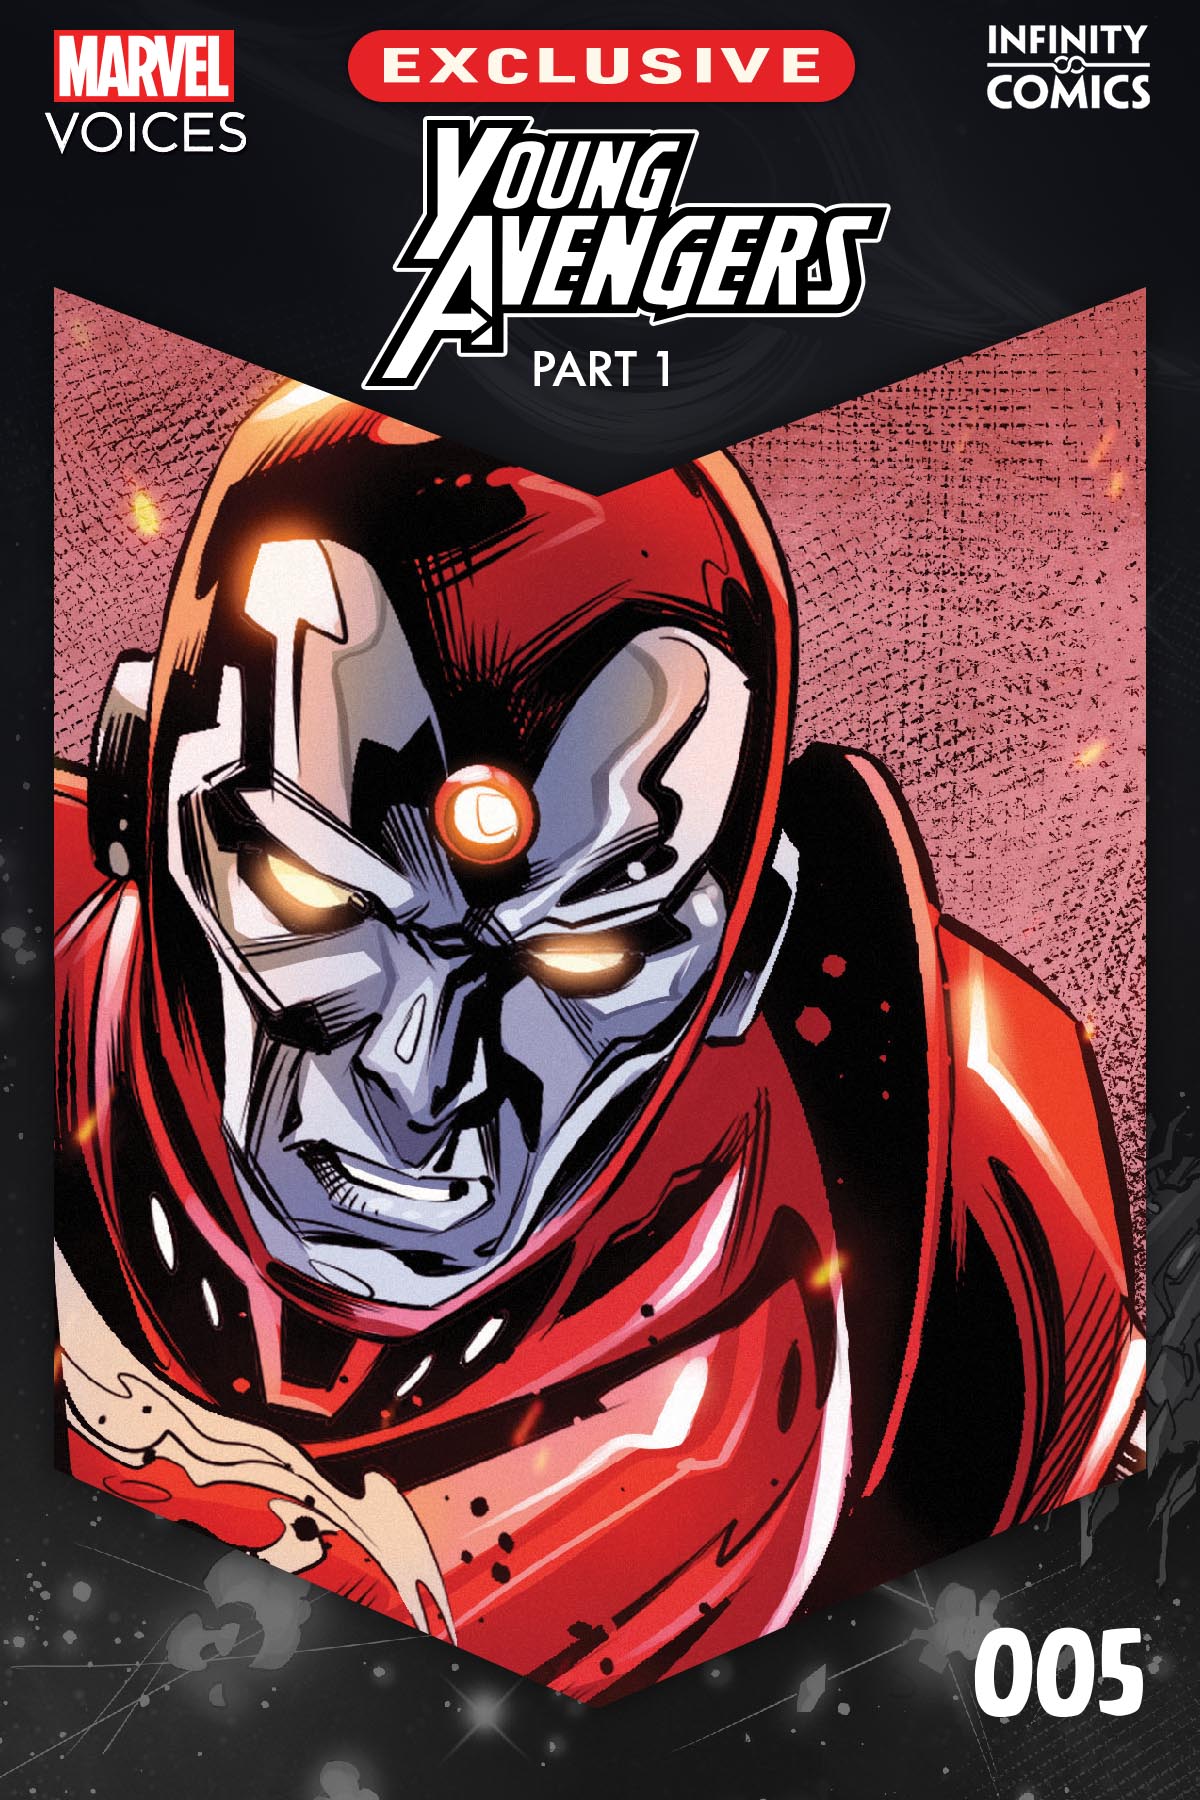 Read online Marvel's Voices Infinity Comic comic -  Issue #5 - 1